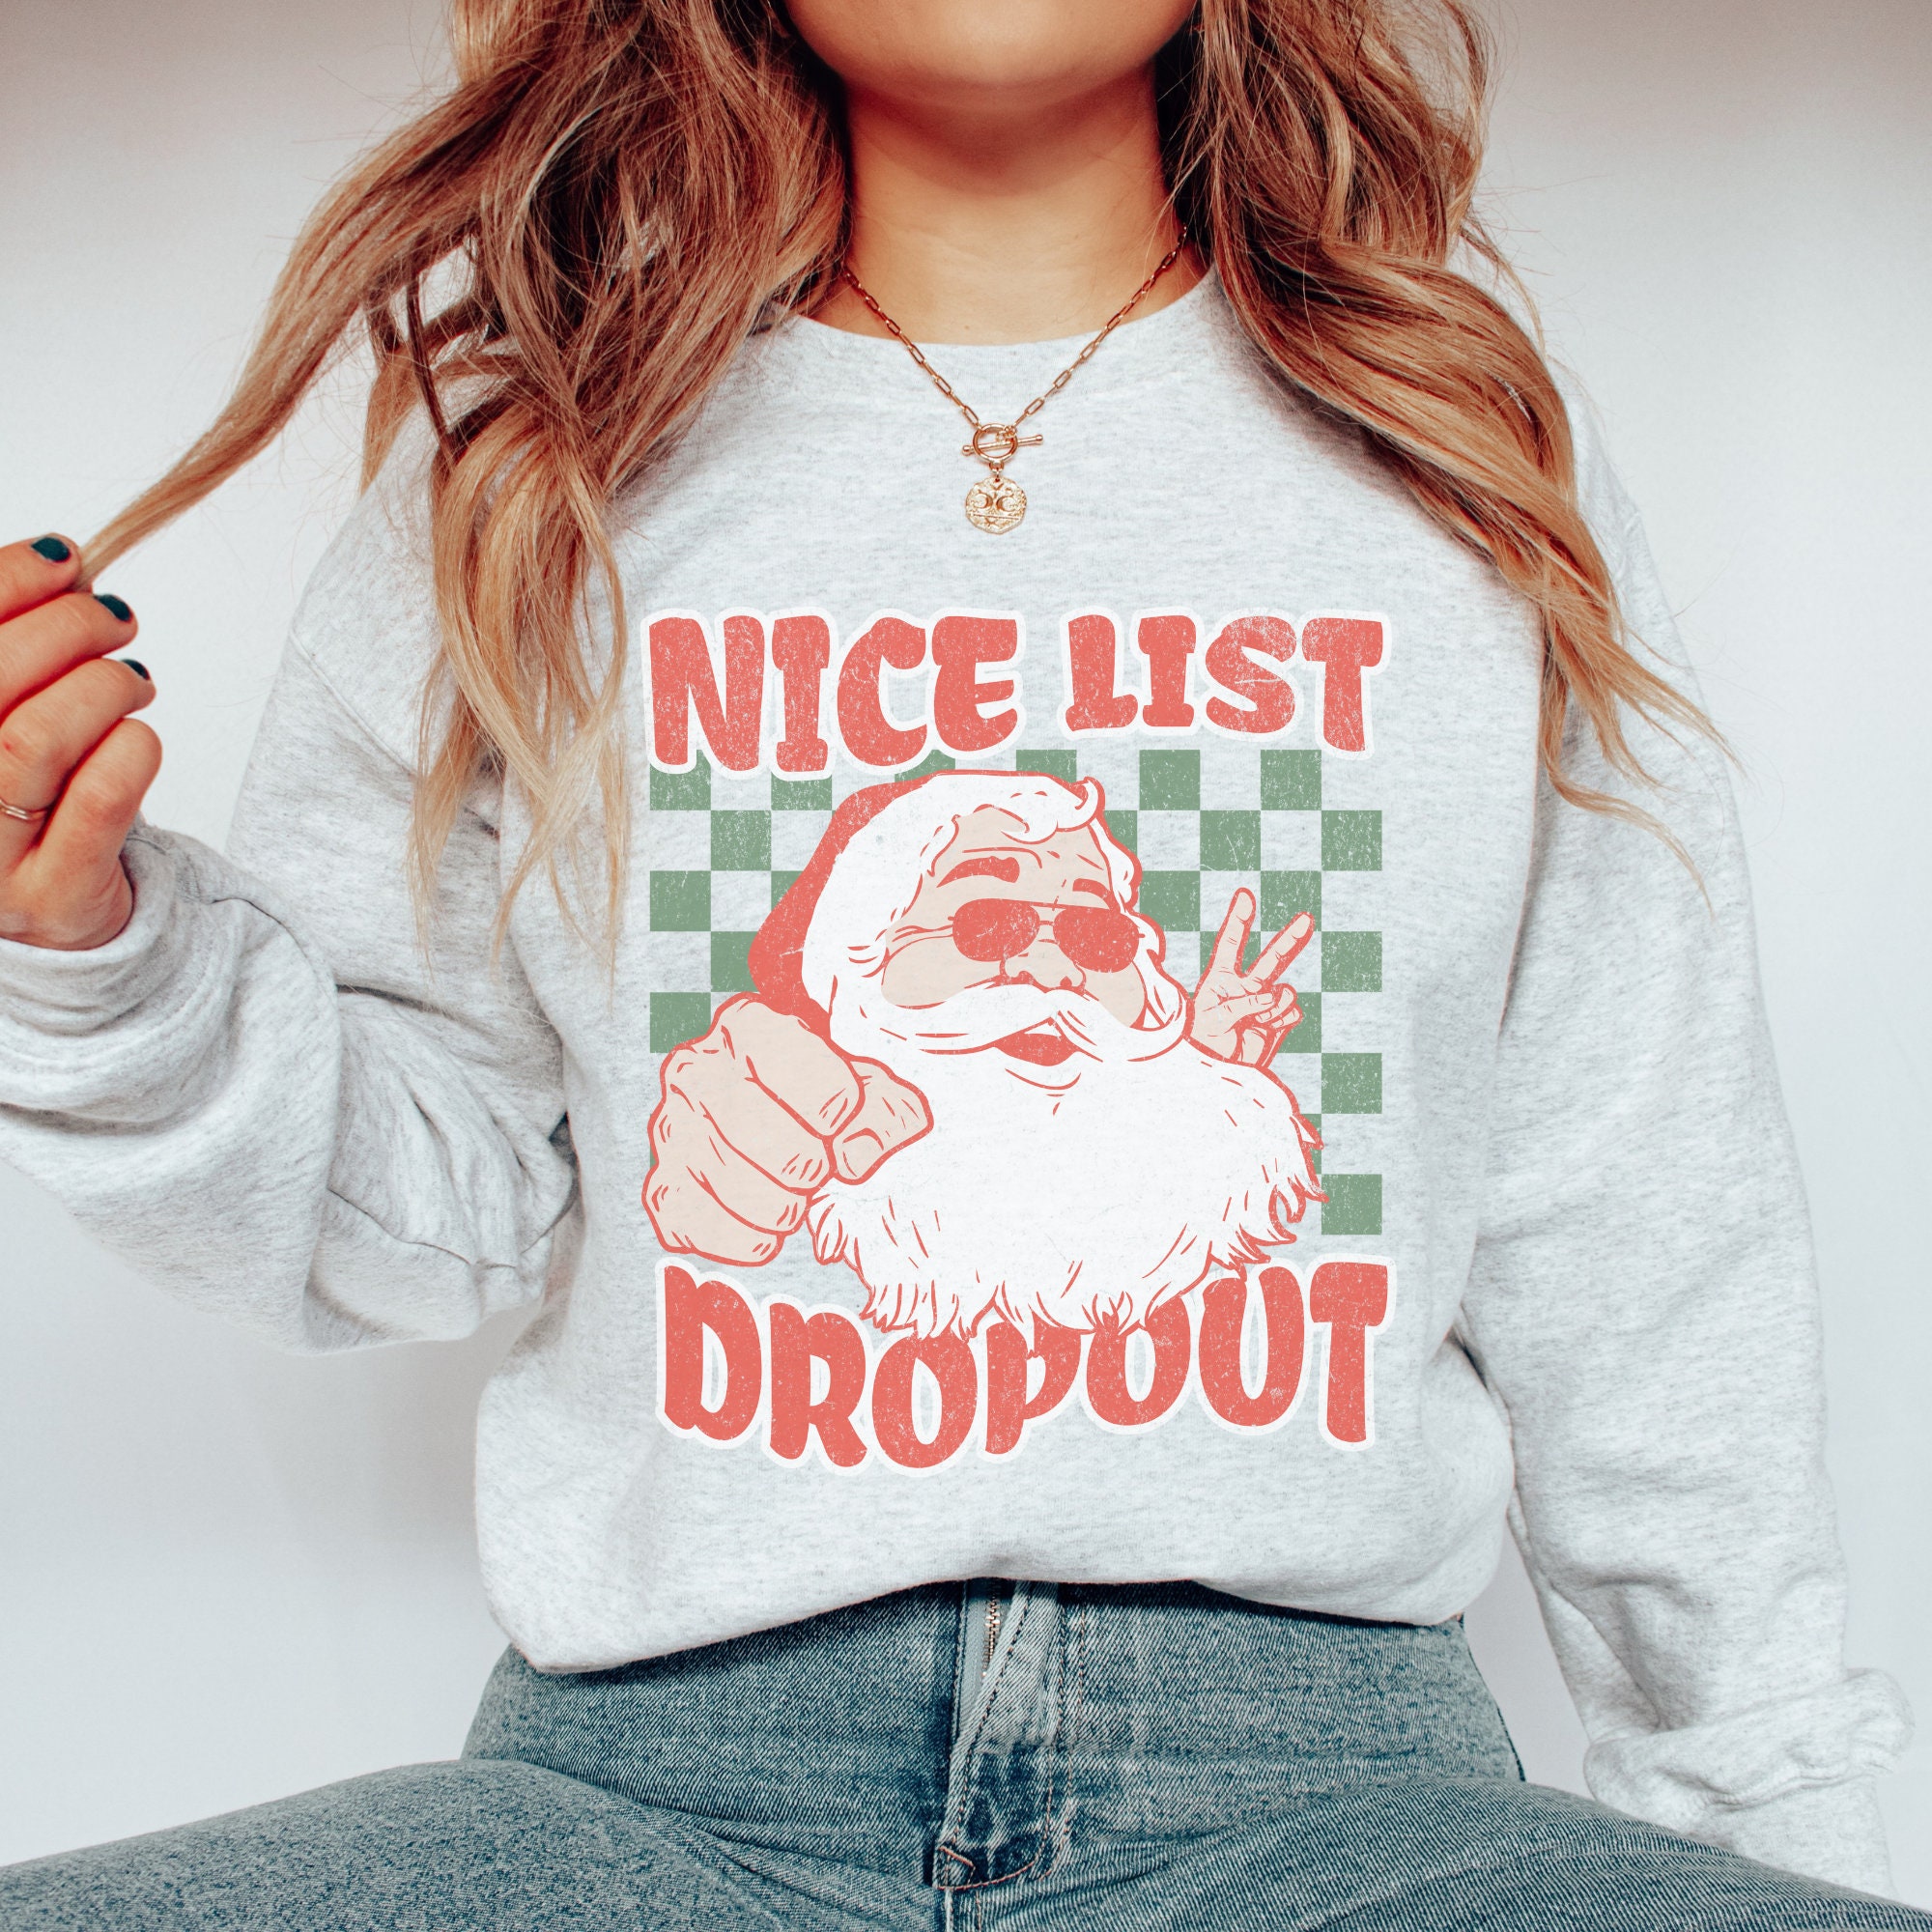  Tuianres Christmas Shirts for Women Plus Size Dressy Fashion  Round Neck Printed Long Sleeve Casual Loose Top Shirt : Sports & Outdoors